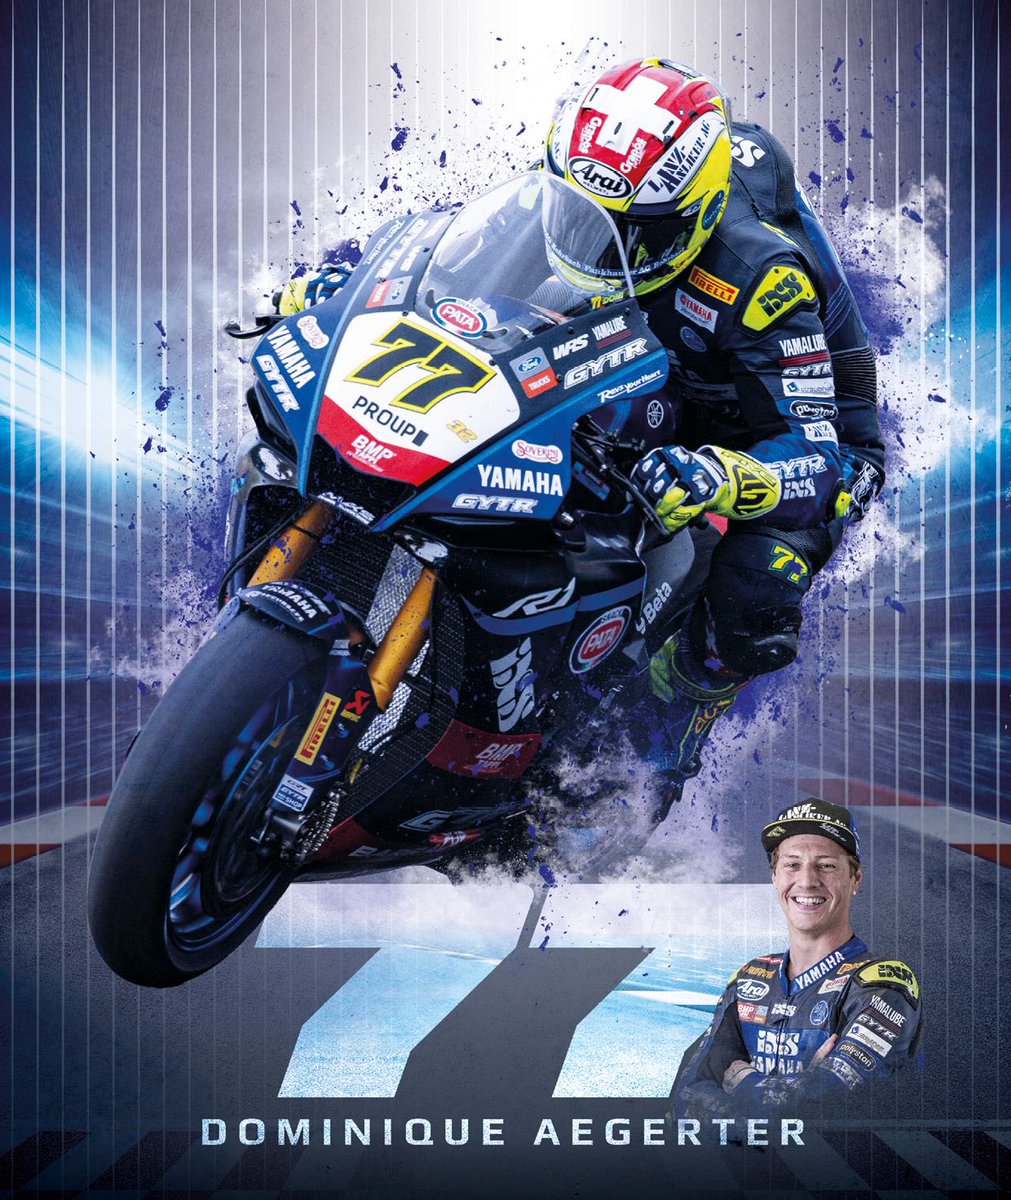 Here is my 2024 @yamaharacingcomofficial rider poster! Come see us at Barcelona this weekend to get yours! 

#77 #domi77 #aegi77 #livefullgas #ad77 #domifighter #yamaha 

domi77.com